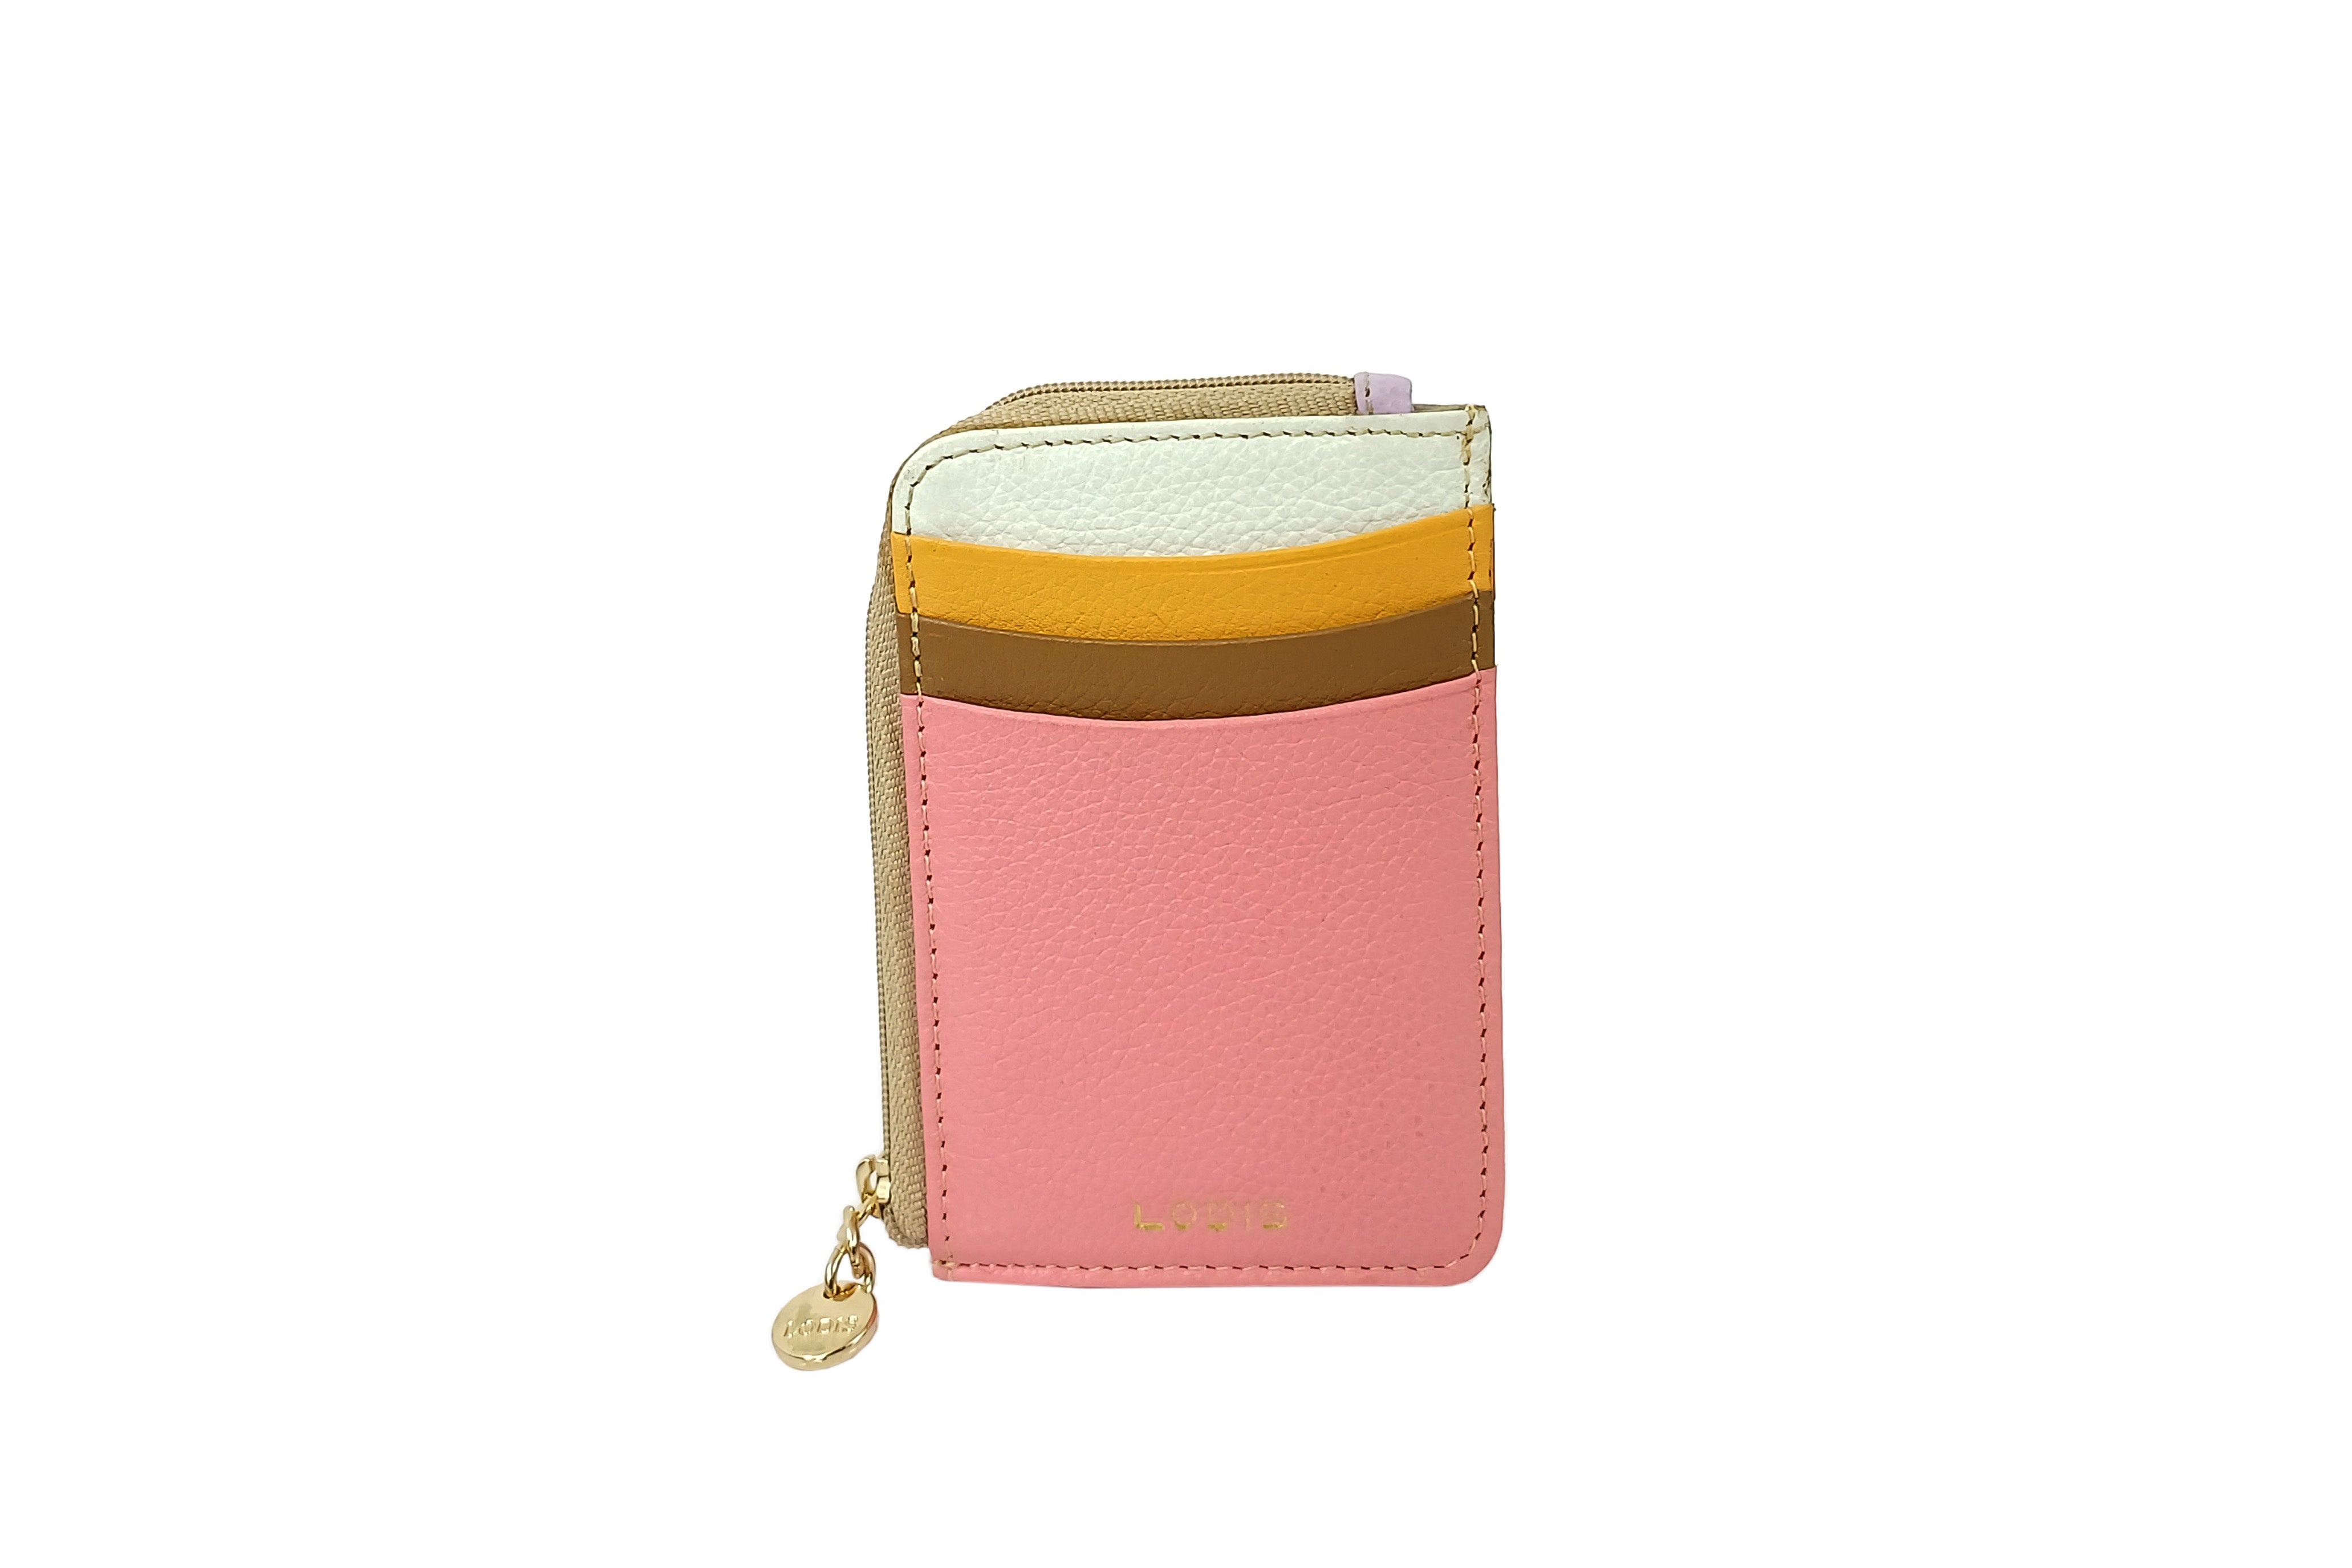 Shop Now The Compact & Stylish Card Cases | Lodis